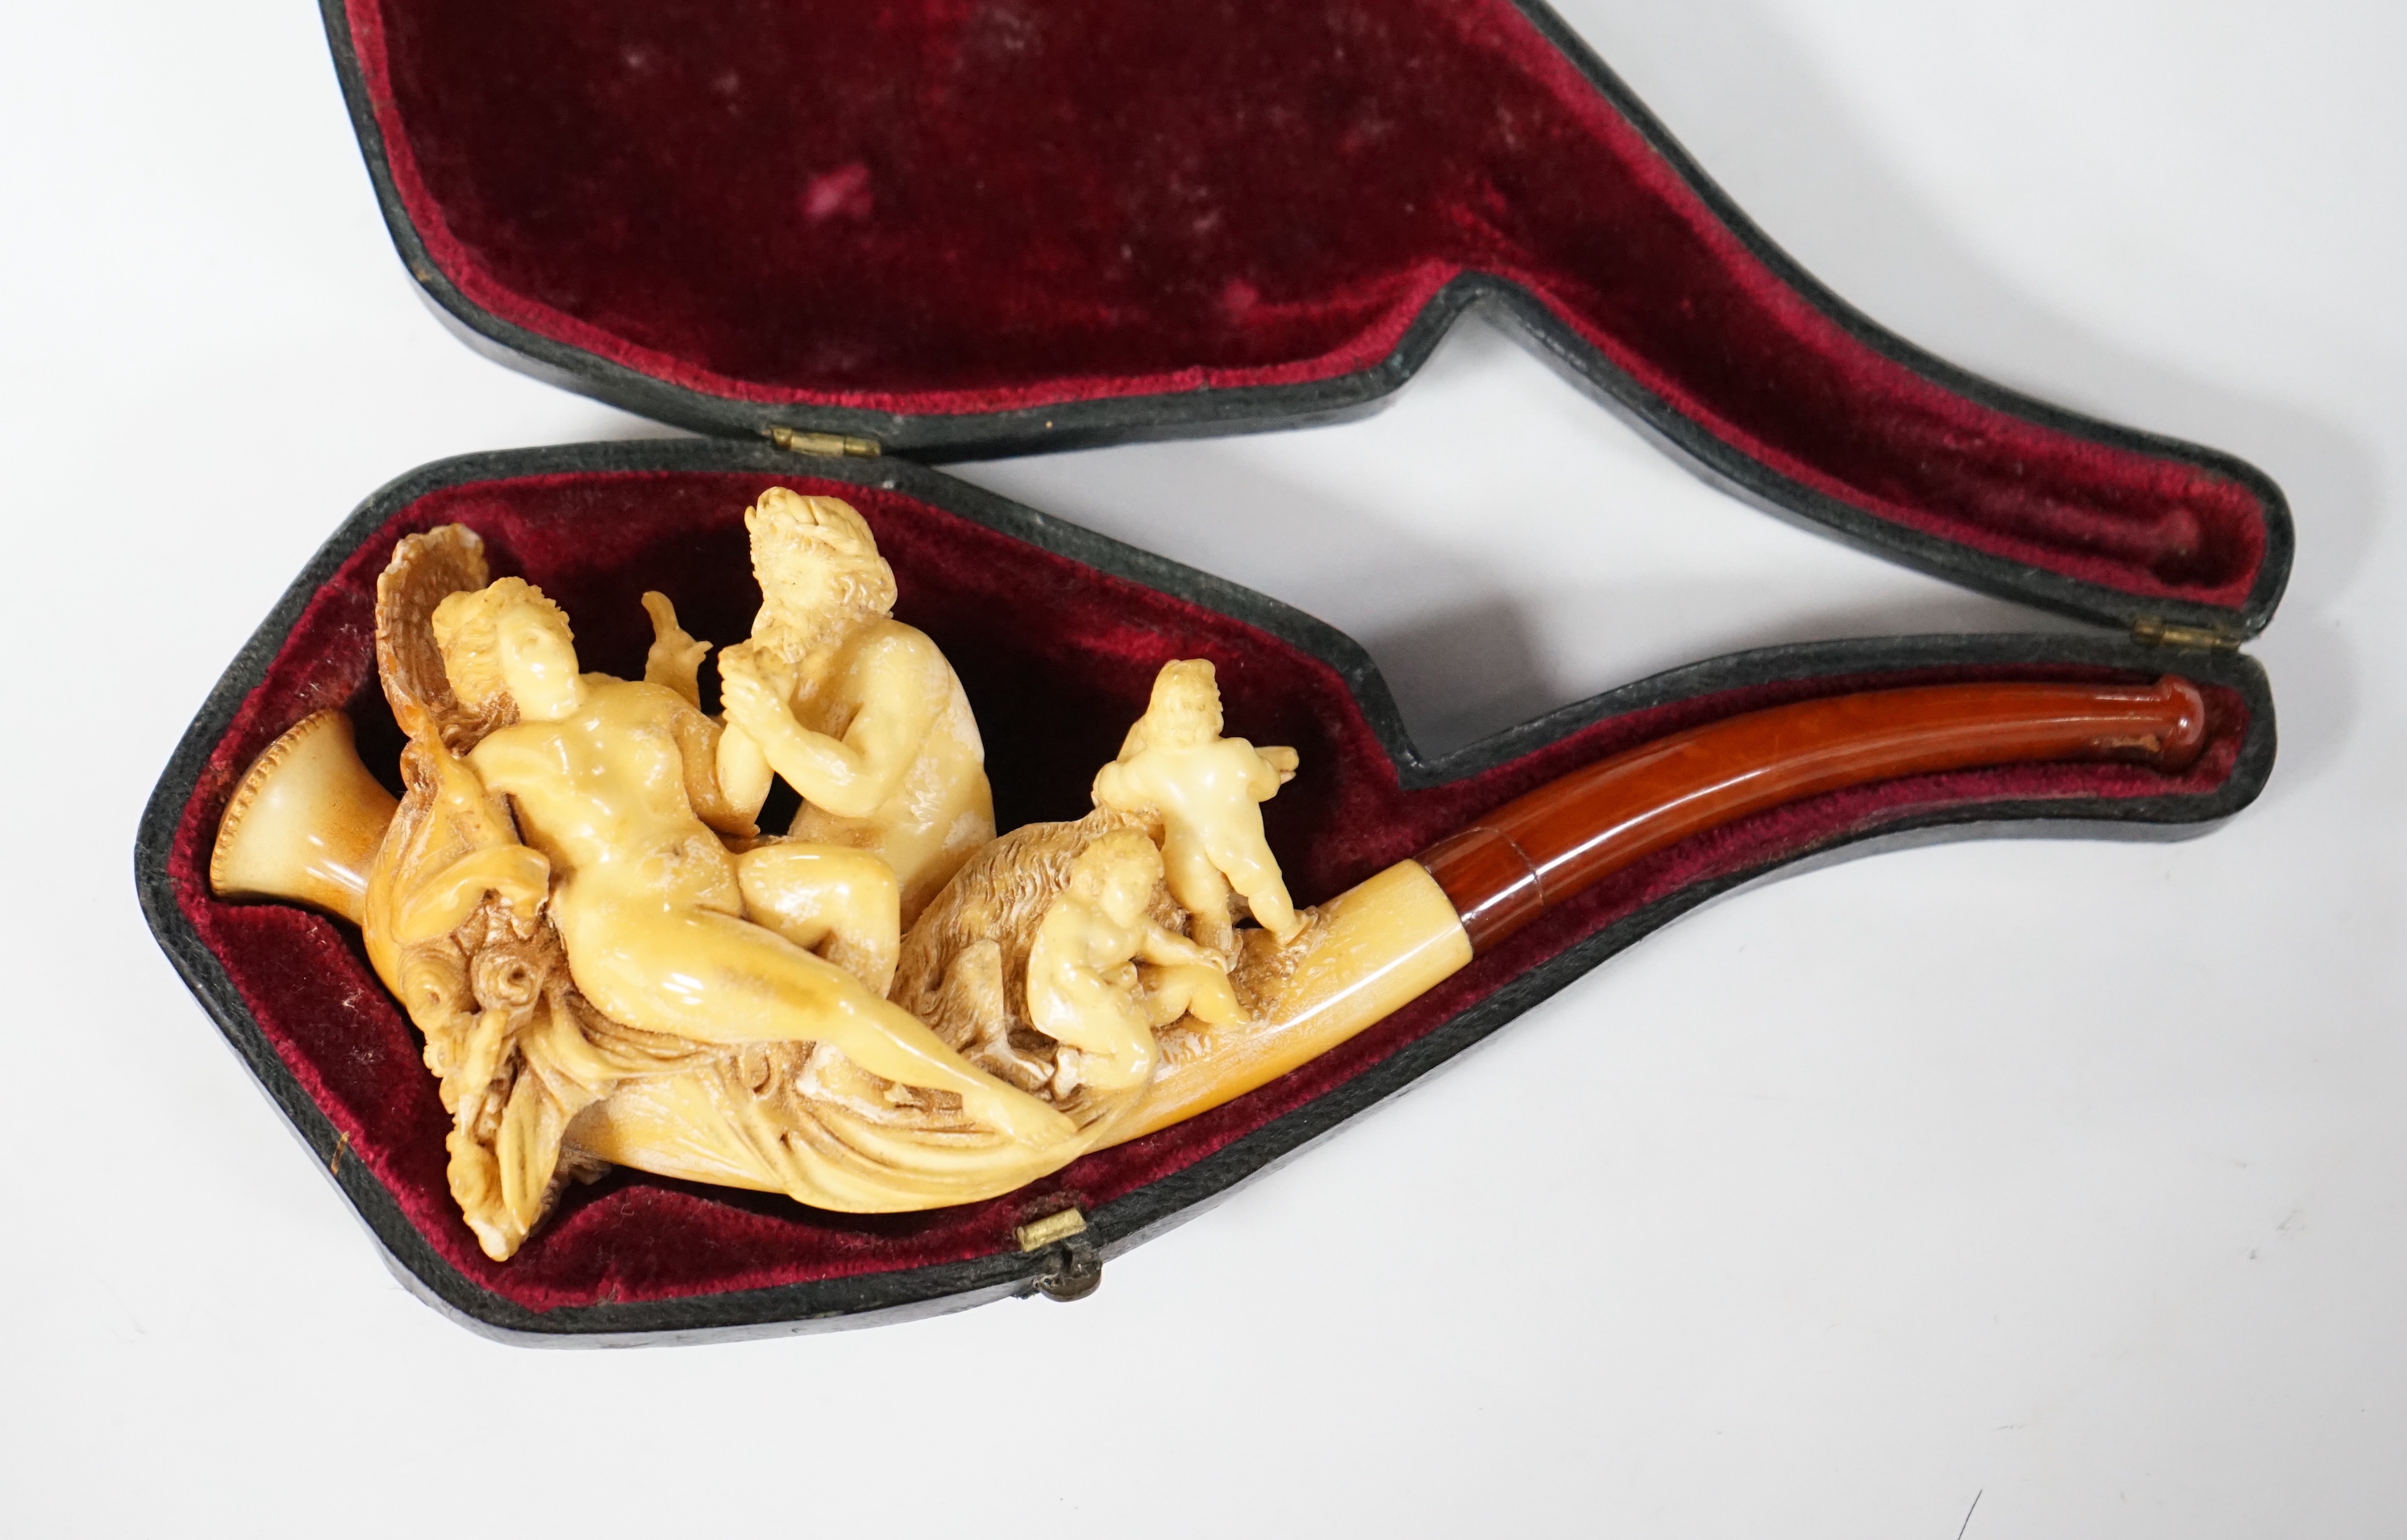 A cased ornate Meerschaum pipe, early 20th century, intricately carved with the figures of Mars and Rhea Silvia with Romulus and Remus and the wolf on the bowl, 18cm long